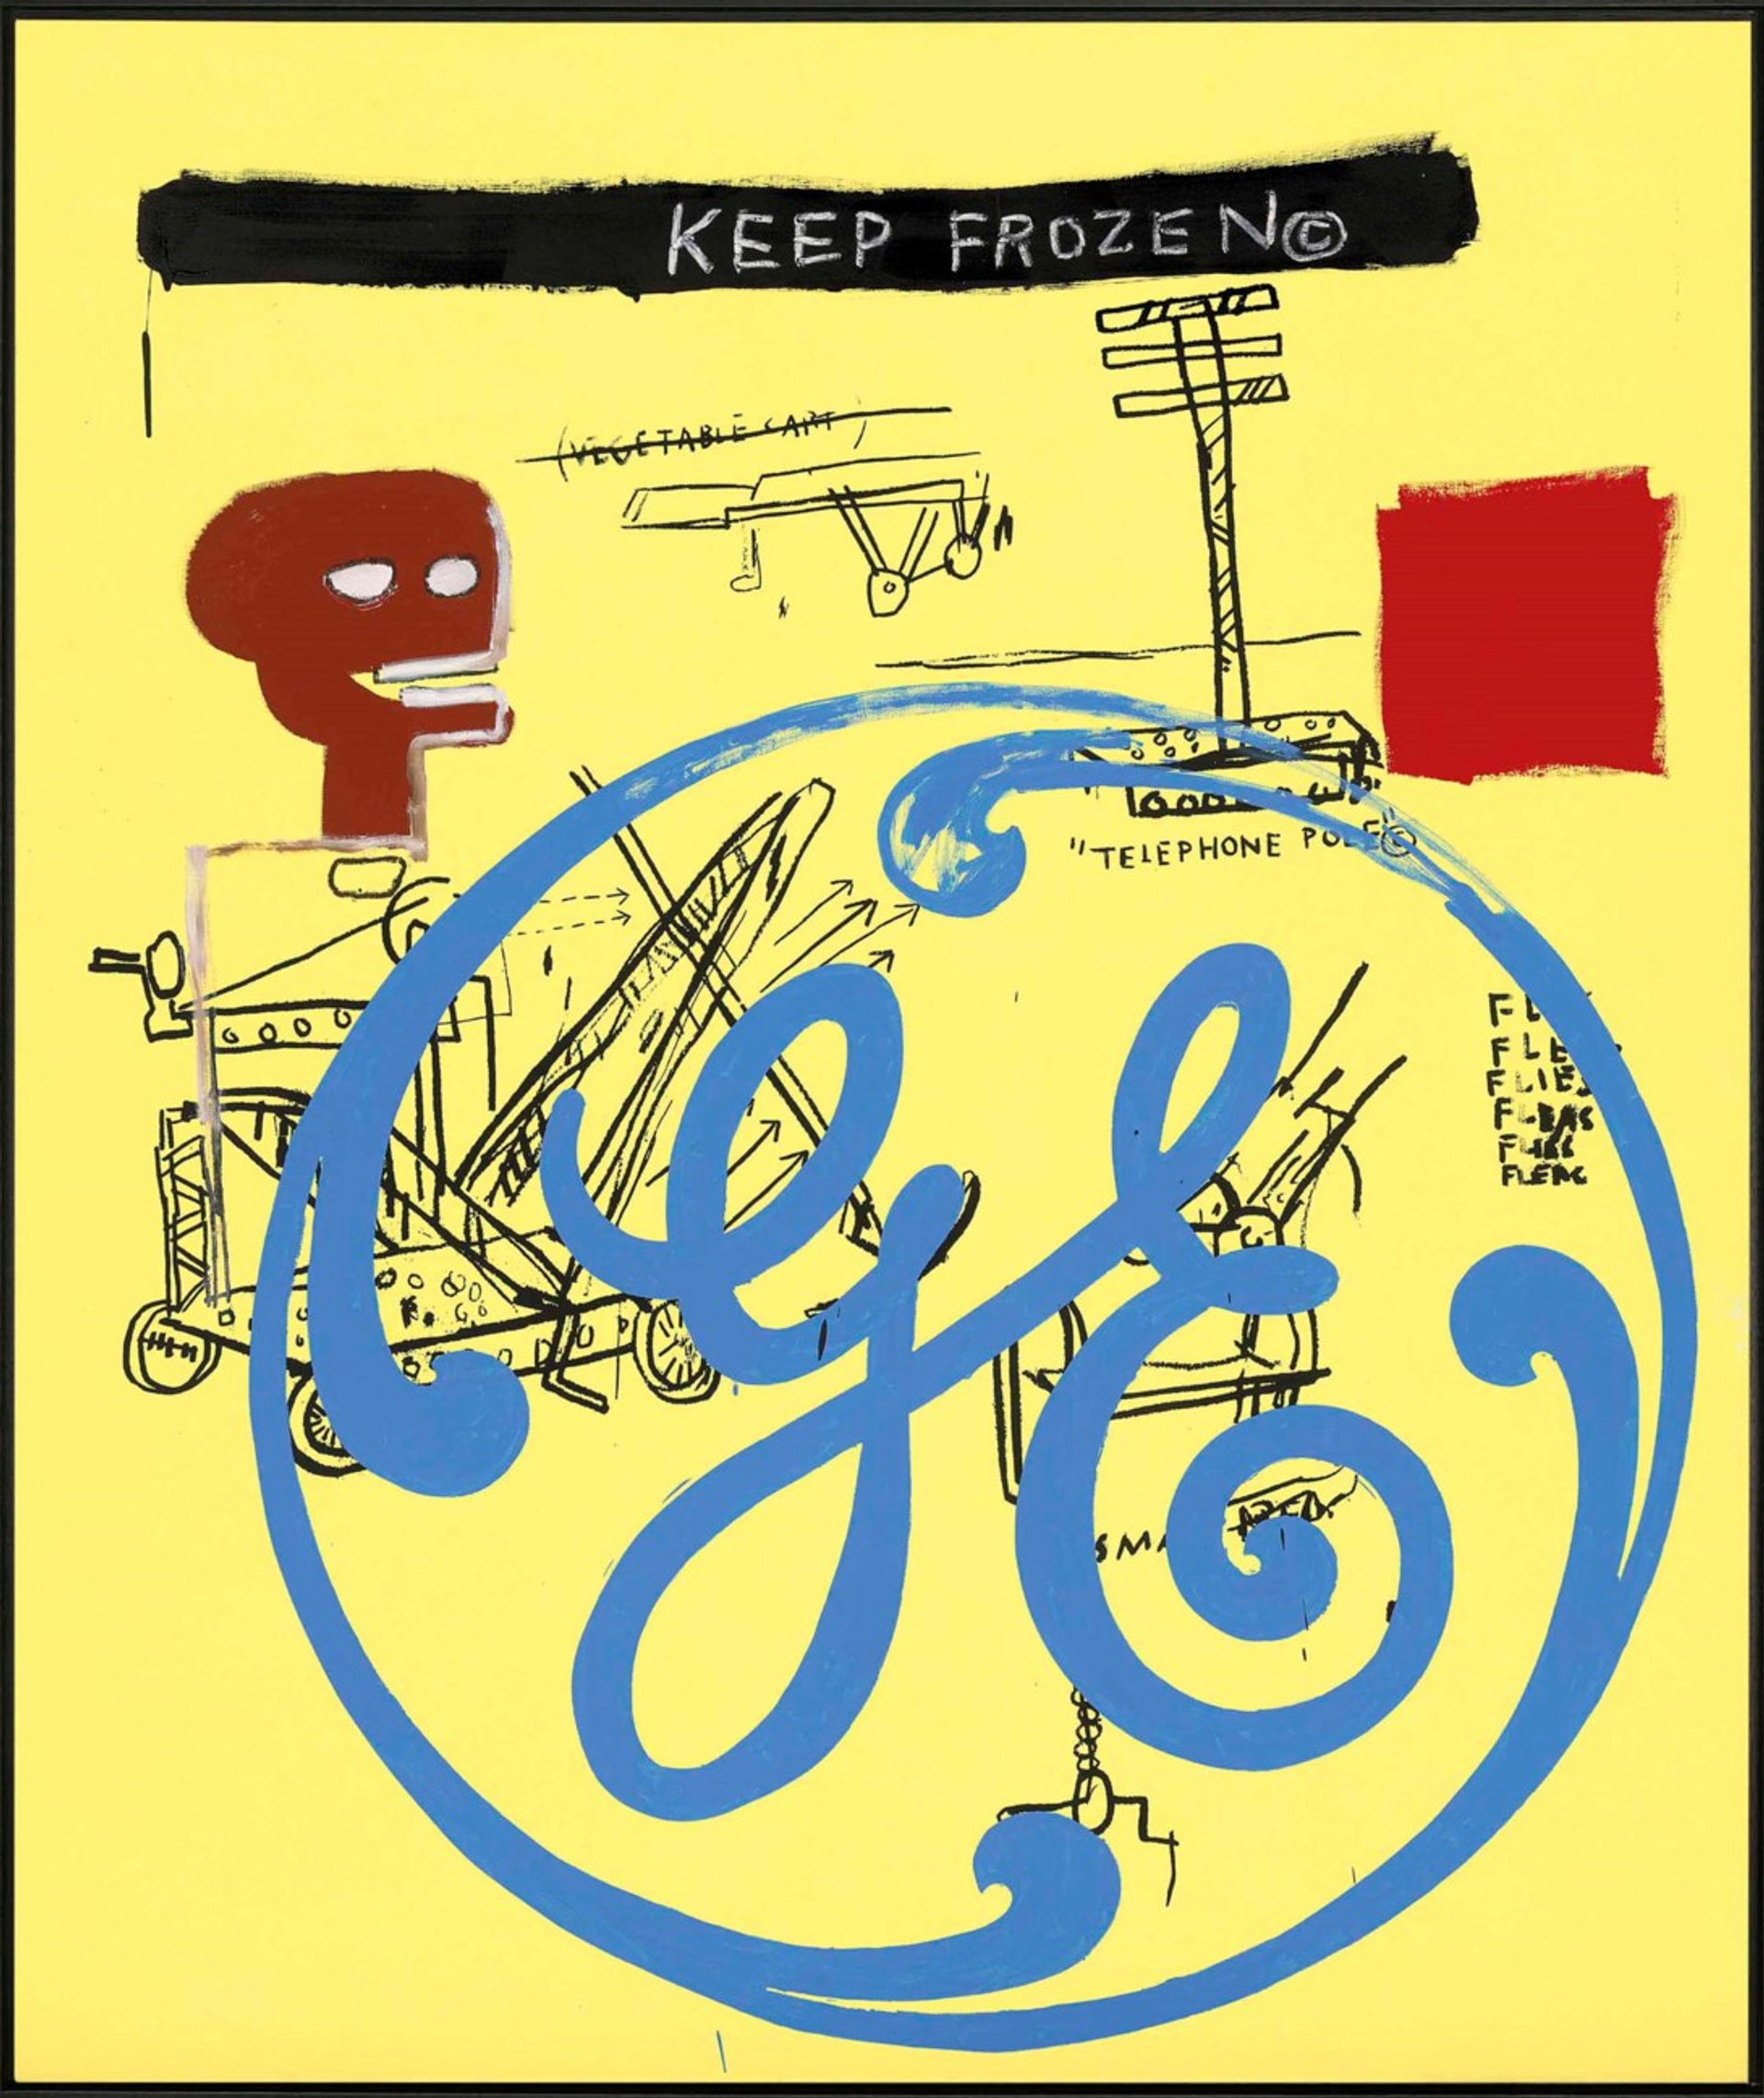 Keep Frozen (General Electric) by Jean-Michel Basquiat and Andy Warhol